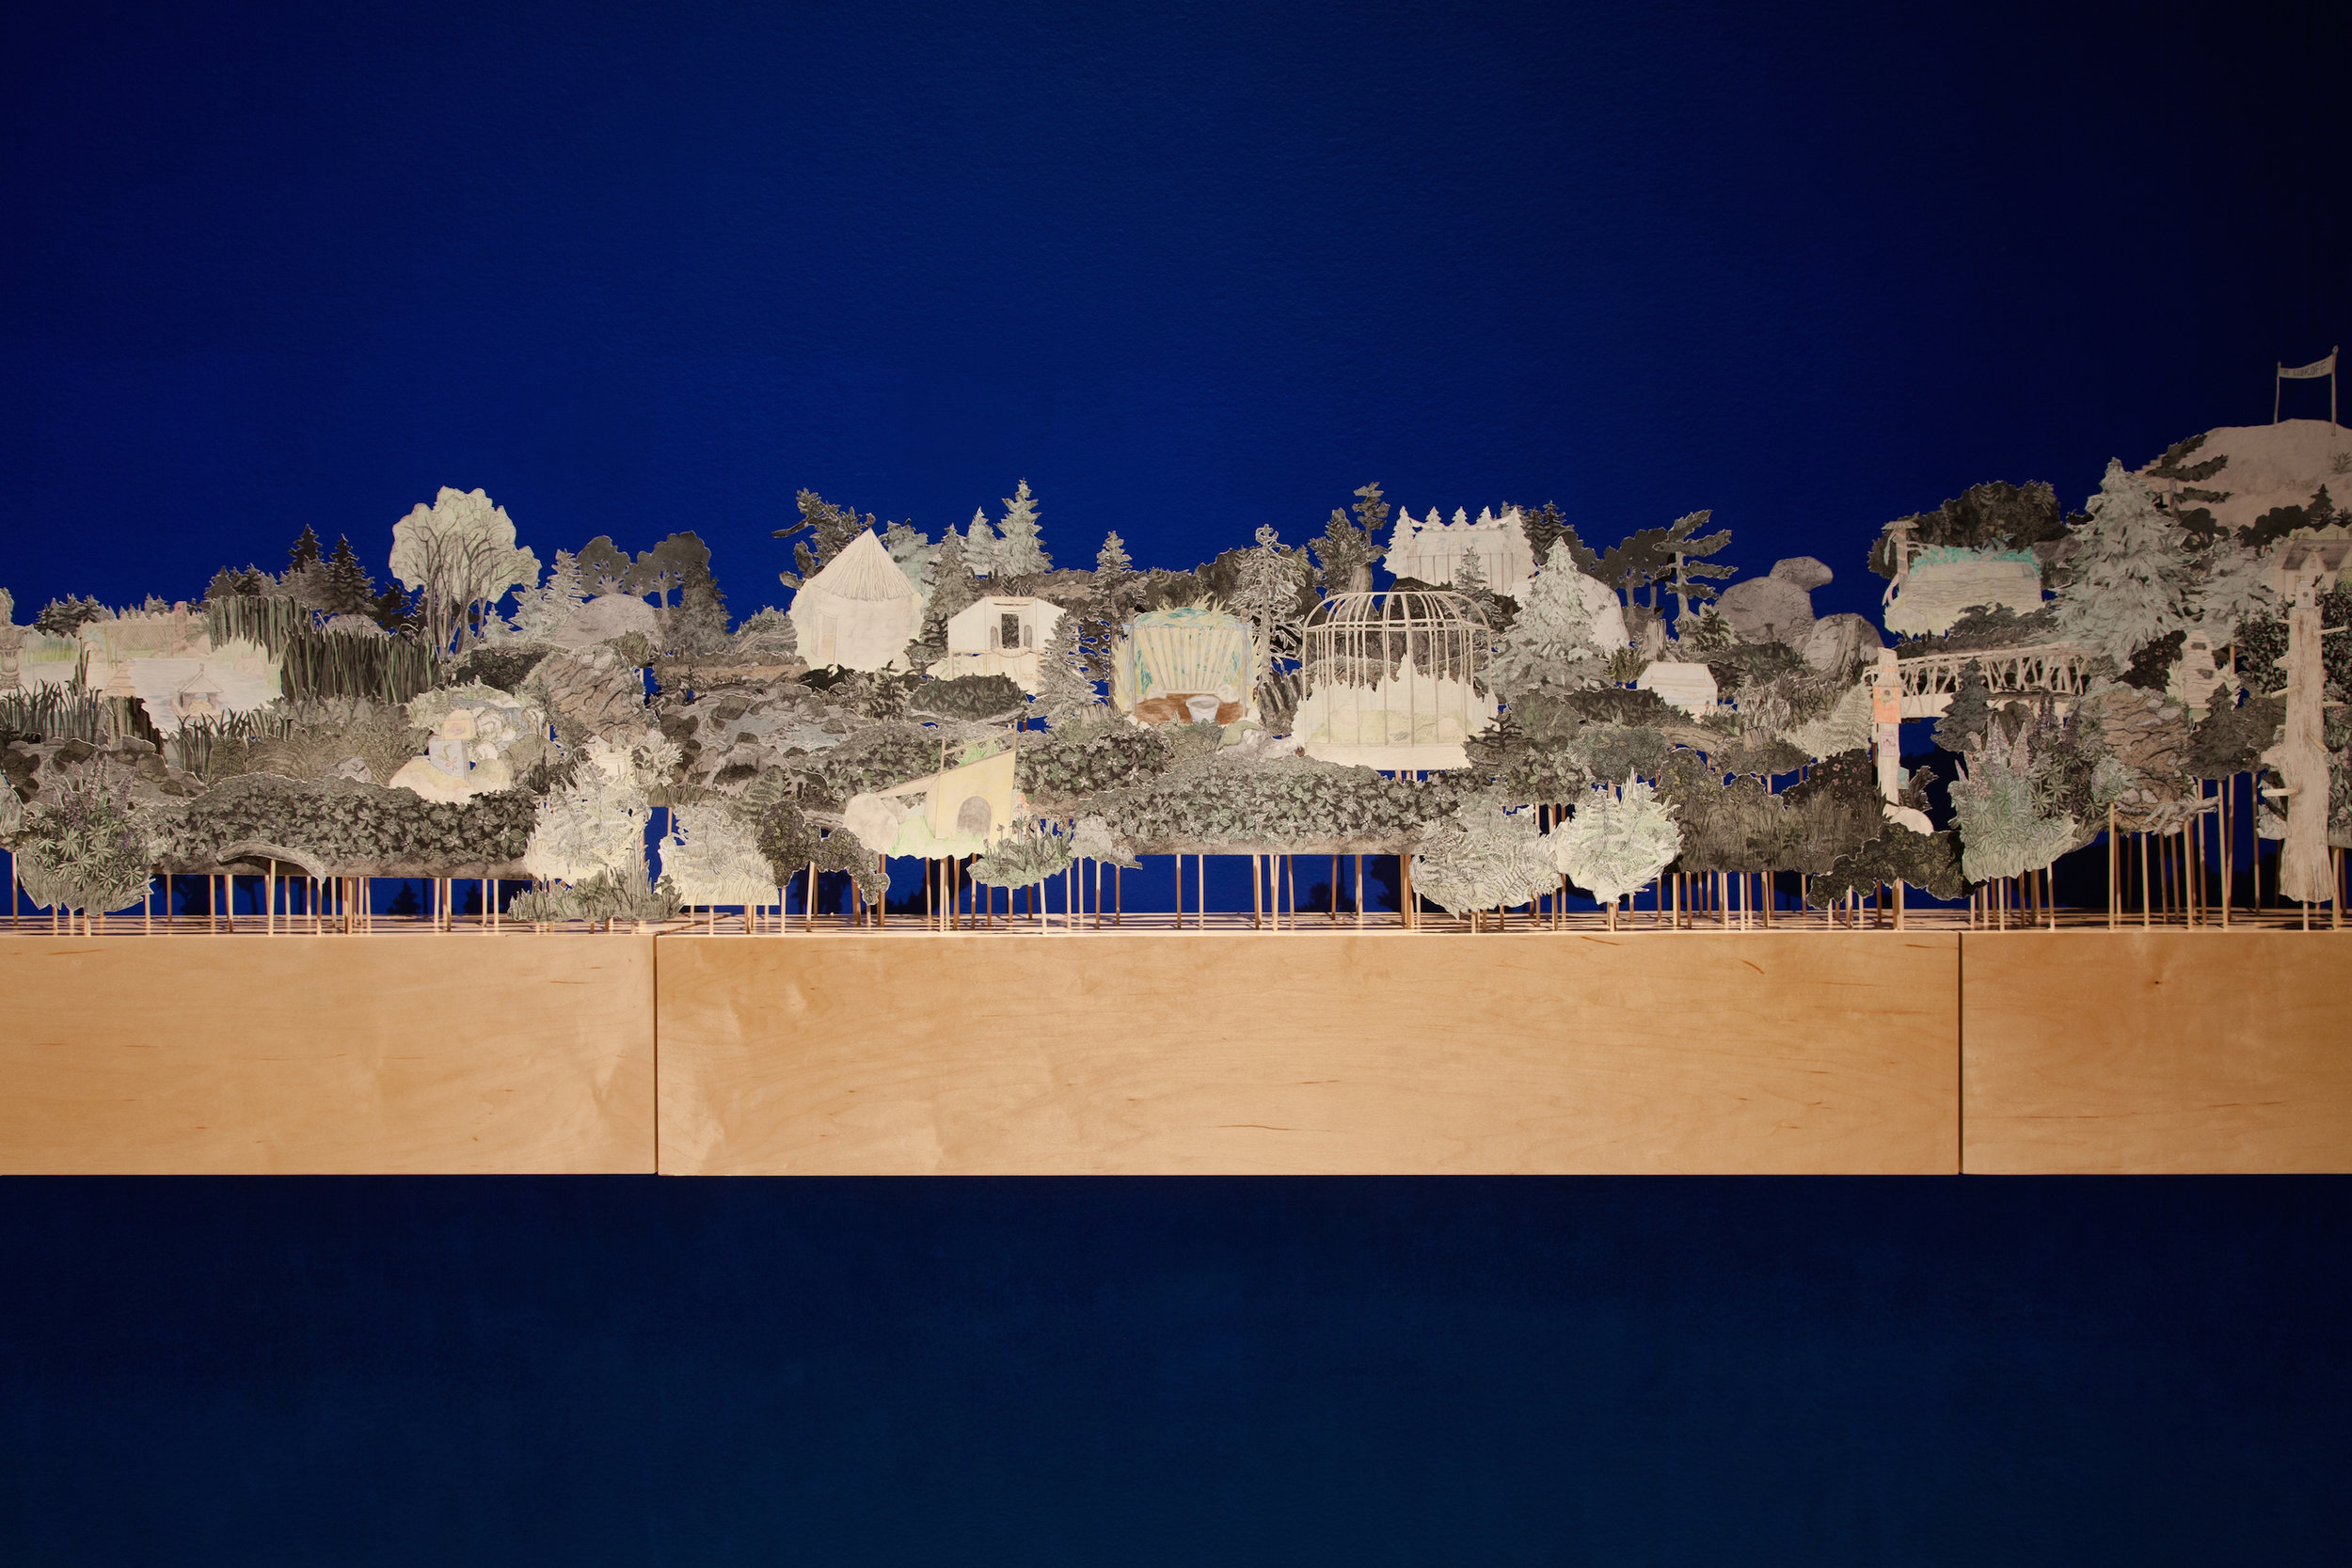    Diorama of the Gardens; a reconstruction of Downs' Zoological Gardens,   detail,     hand-coloured and cut etchings, coloured pencil drawings, and birch base. 14 feet long, 2016. Installed at the Owens Art Gallery, Sackville, NB 